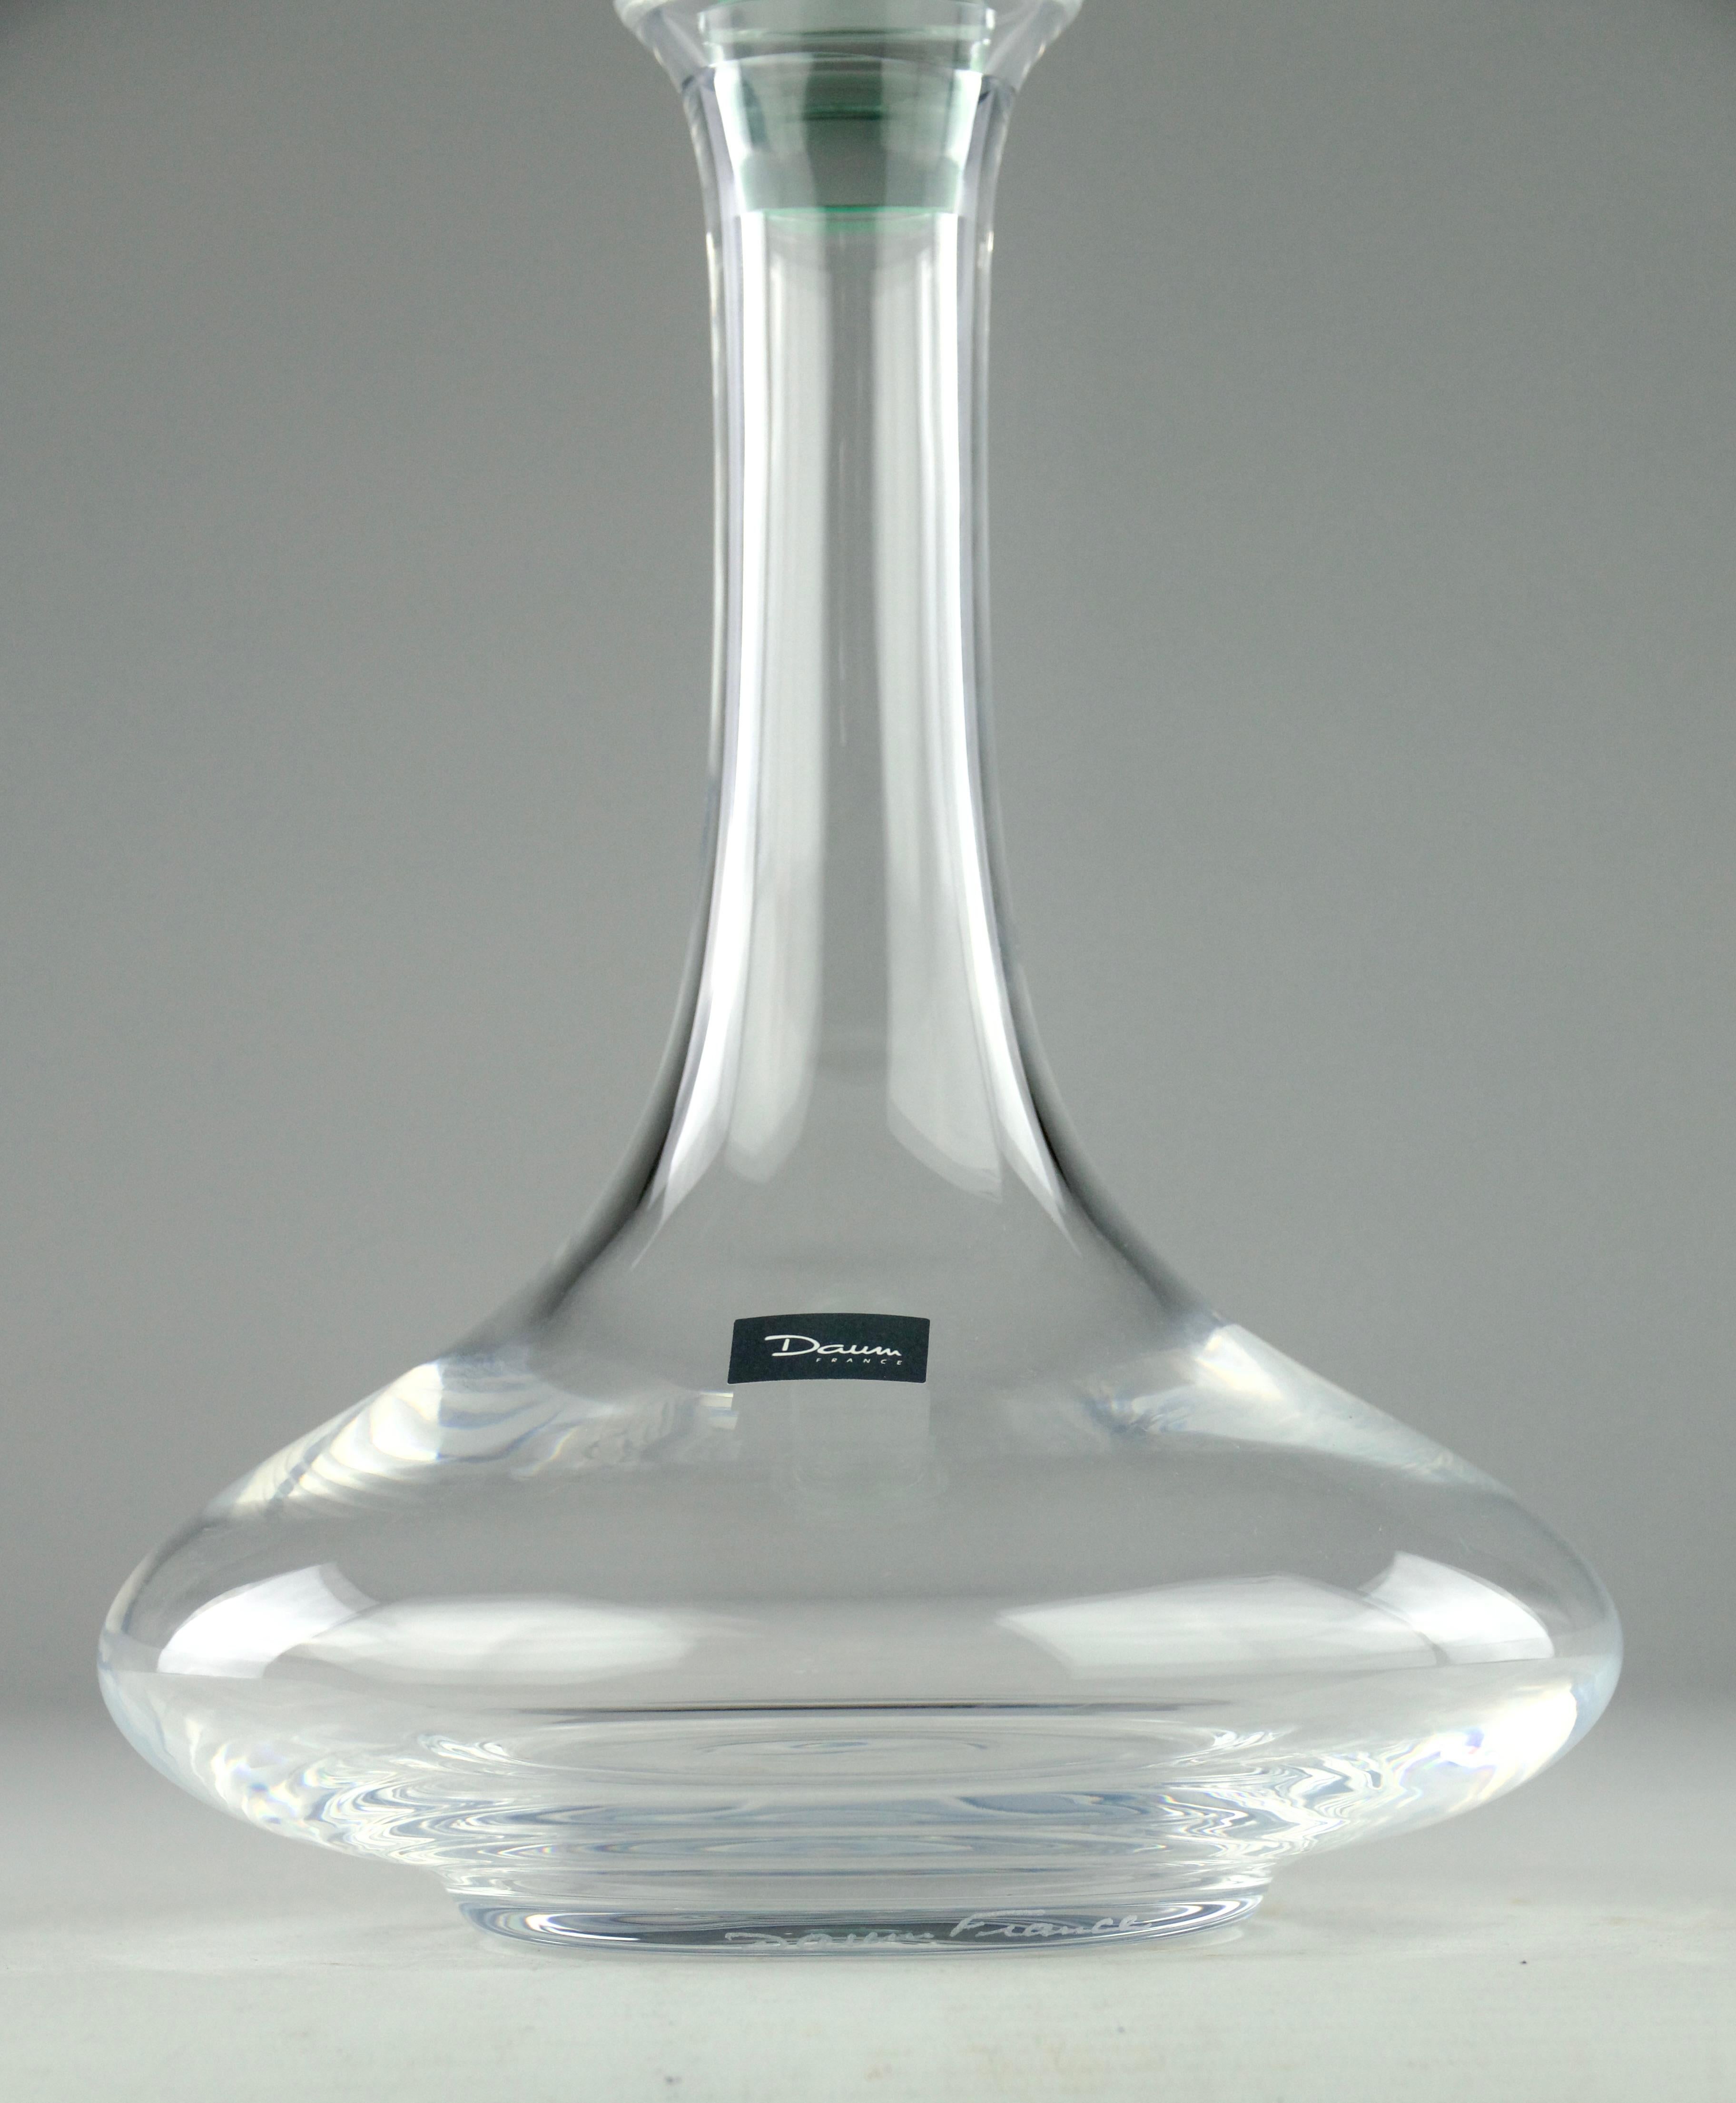 French Daum France, Grapevine Decanter Carafe, France 1980s Luxury Crystalware Service For Sale